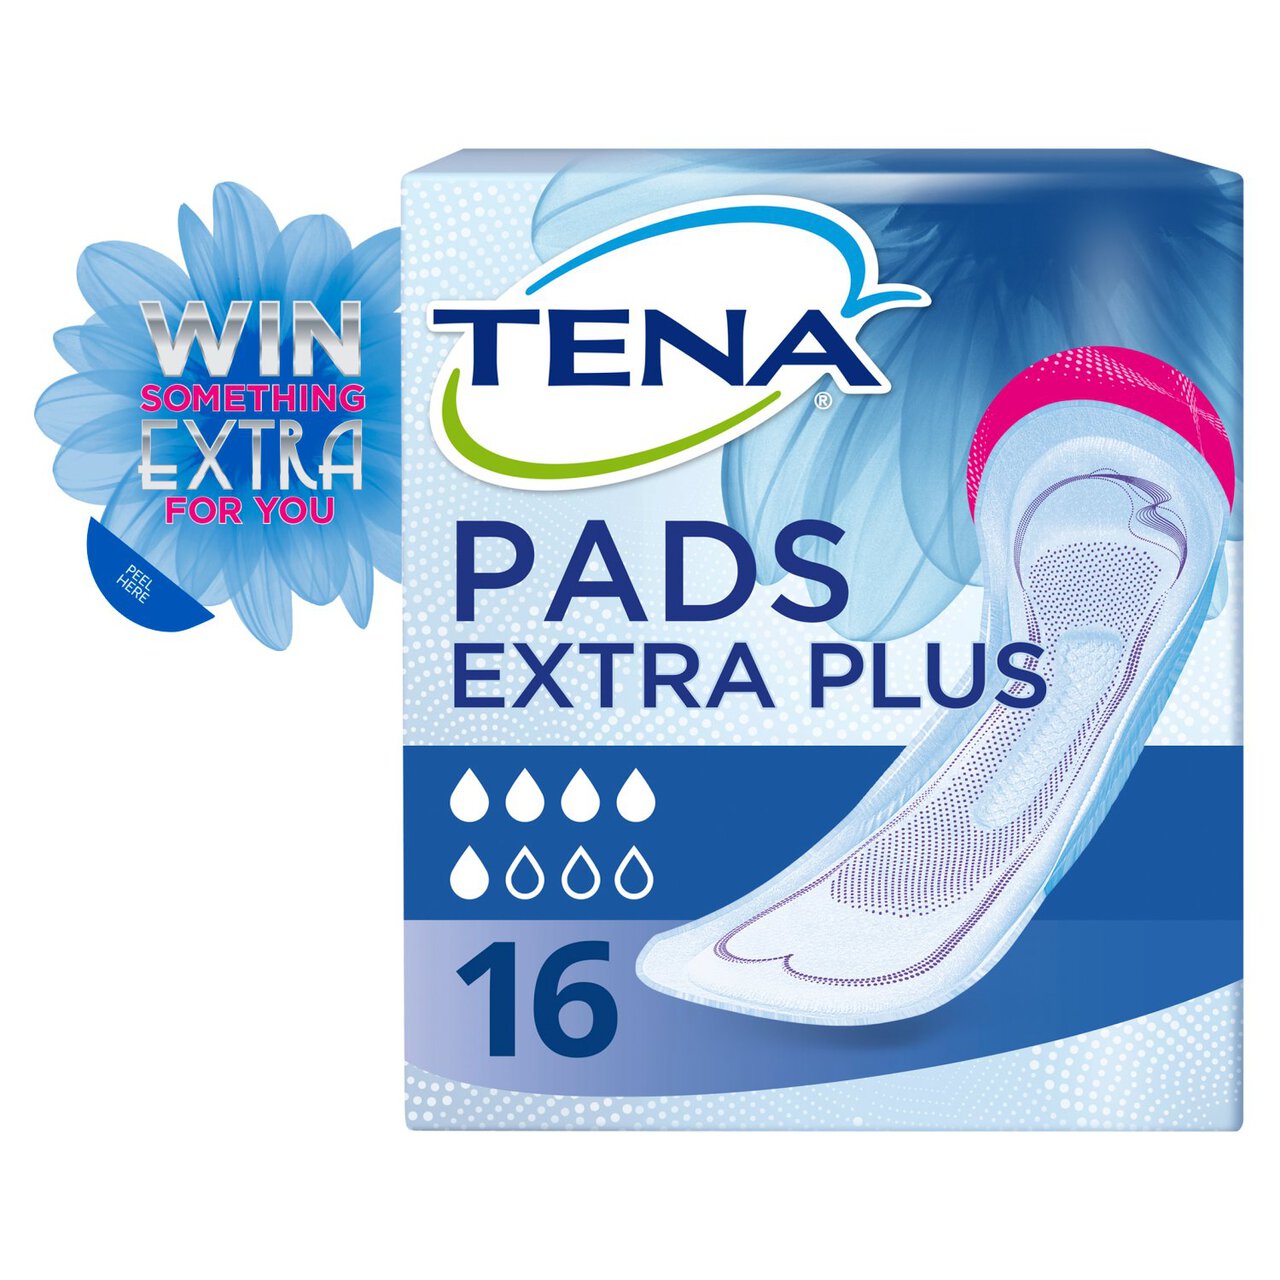 TENA Lady Discreet Extra Plus Incontinence Pads 2 x 8 per pack